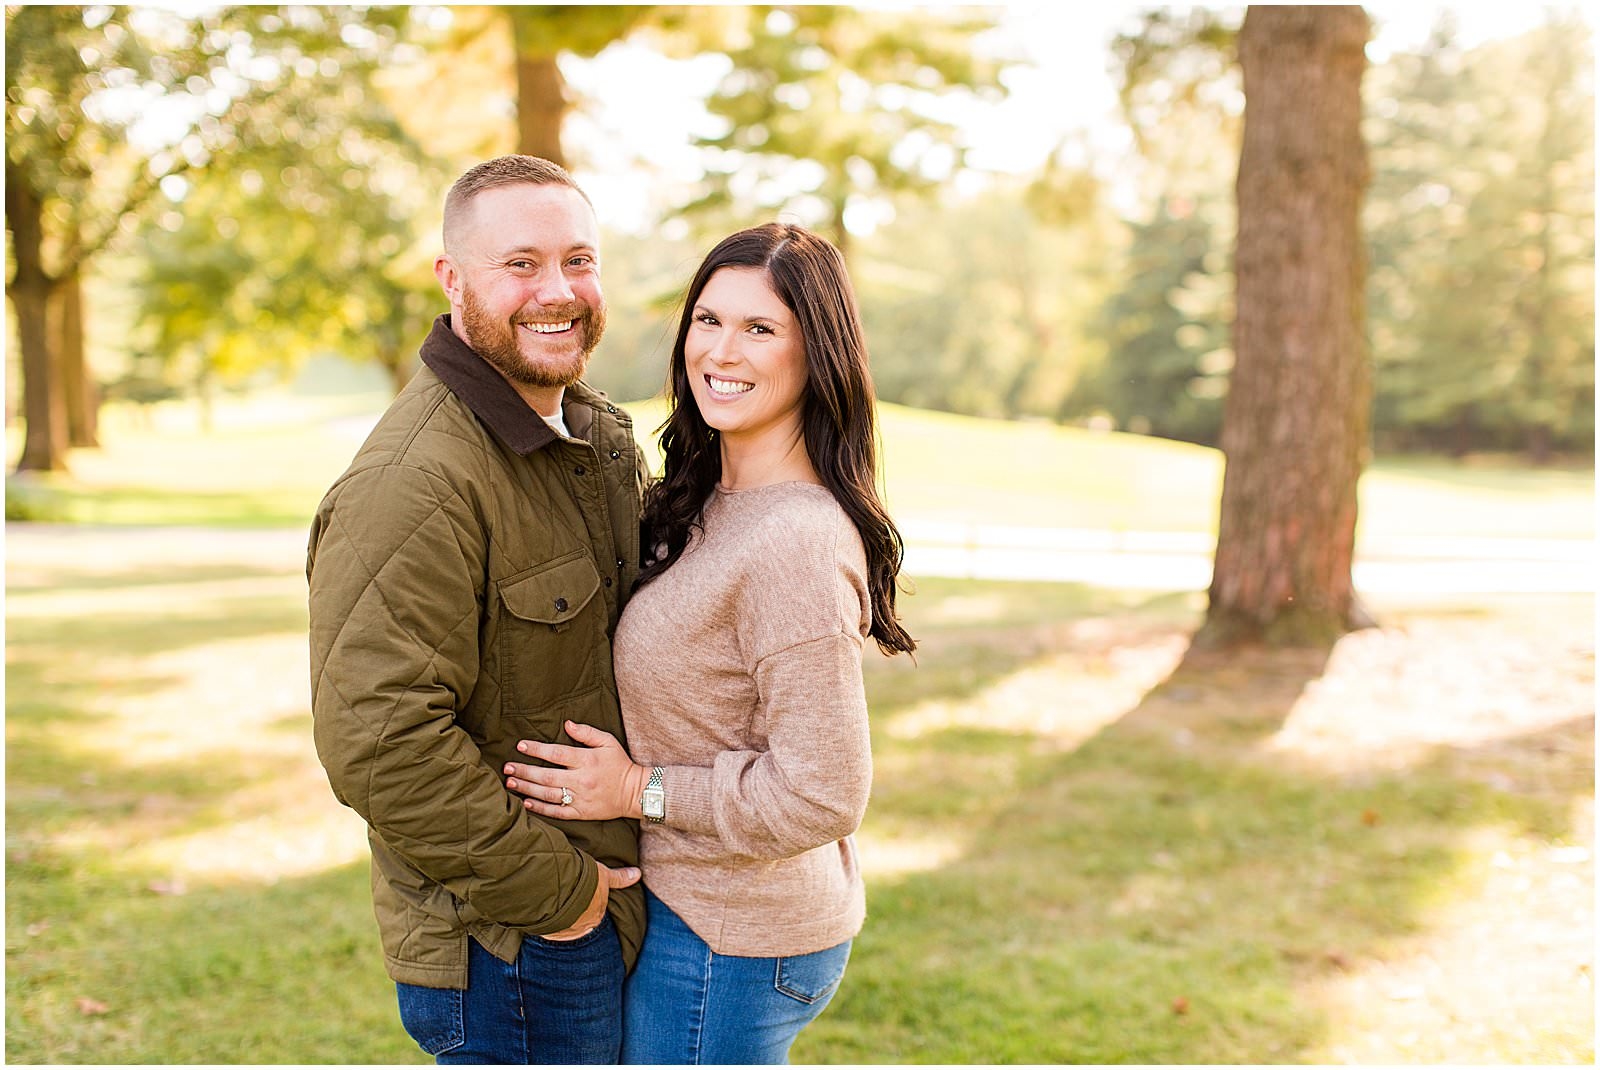 A Rolling Hills Country Club Engagement Session | Meagan and Kyle | Bret and Brandie Photography 0005.jpg